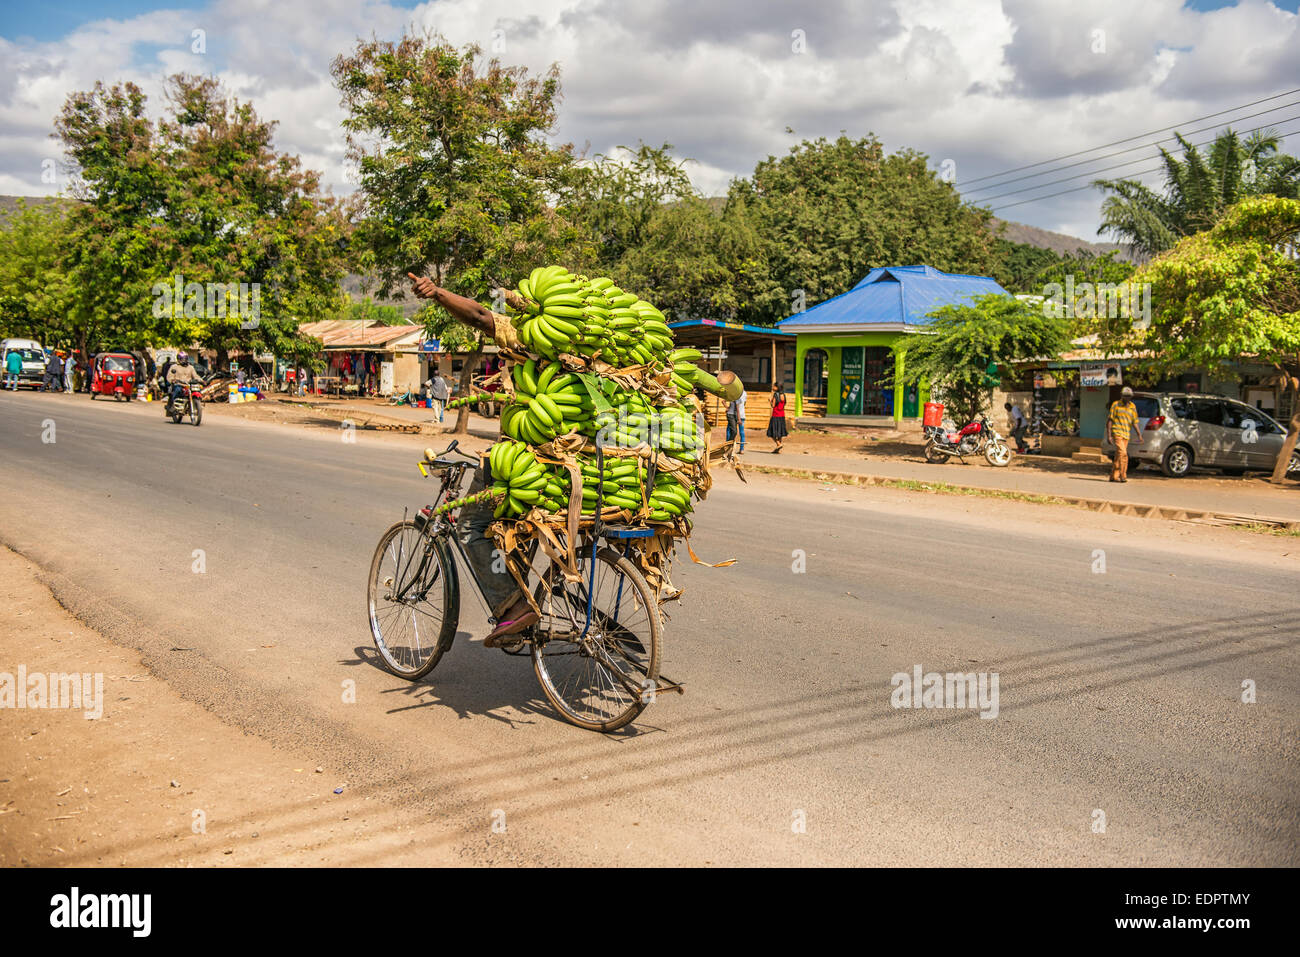 African man traveling on a bike with a bunch of bananas Stock Photo